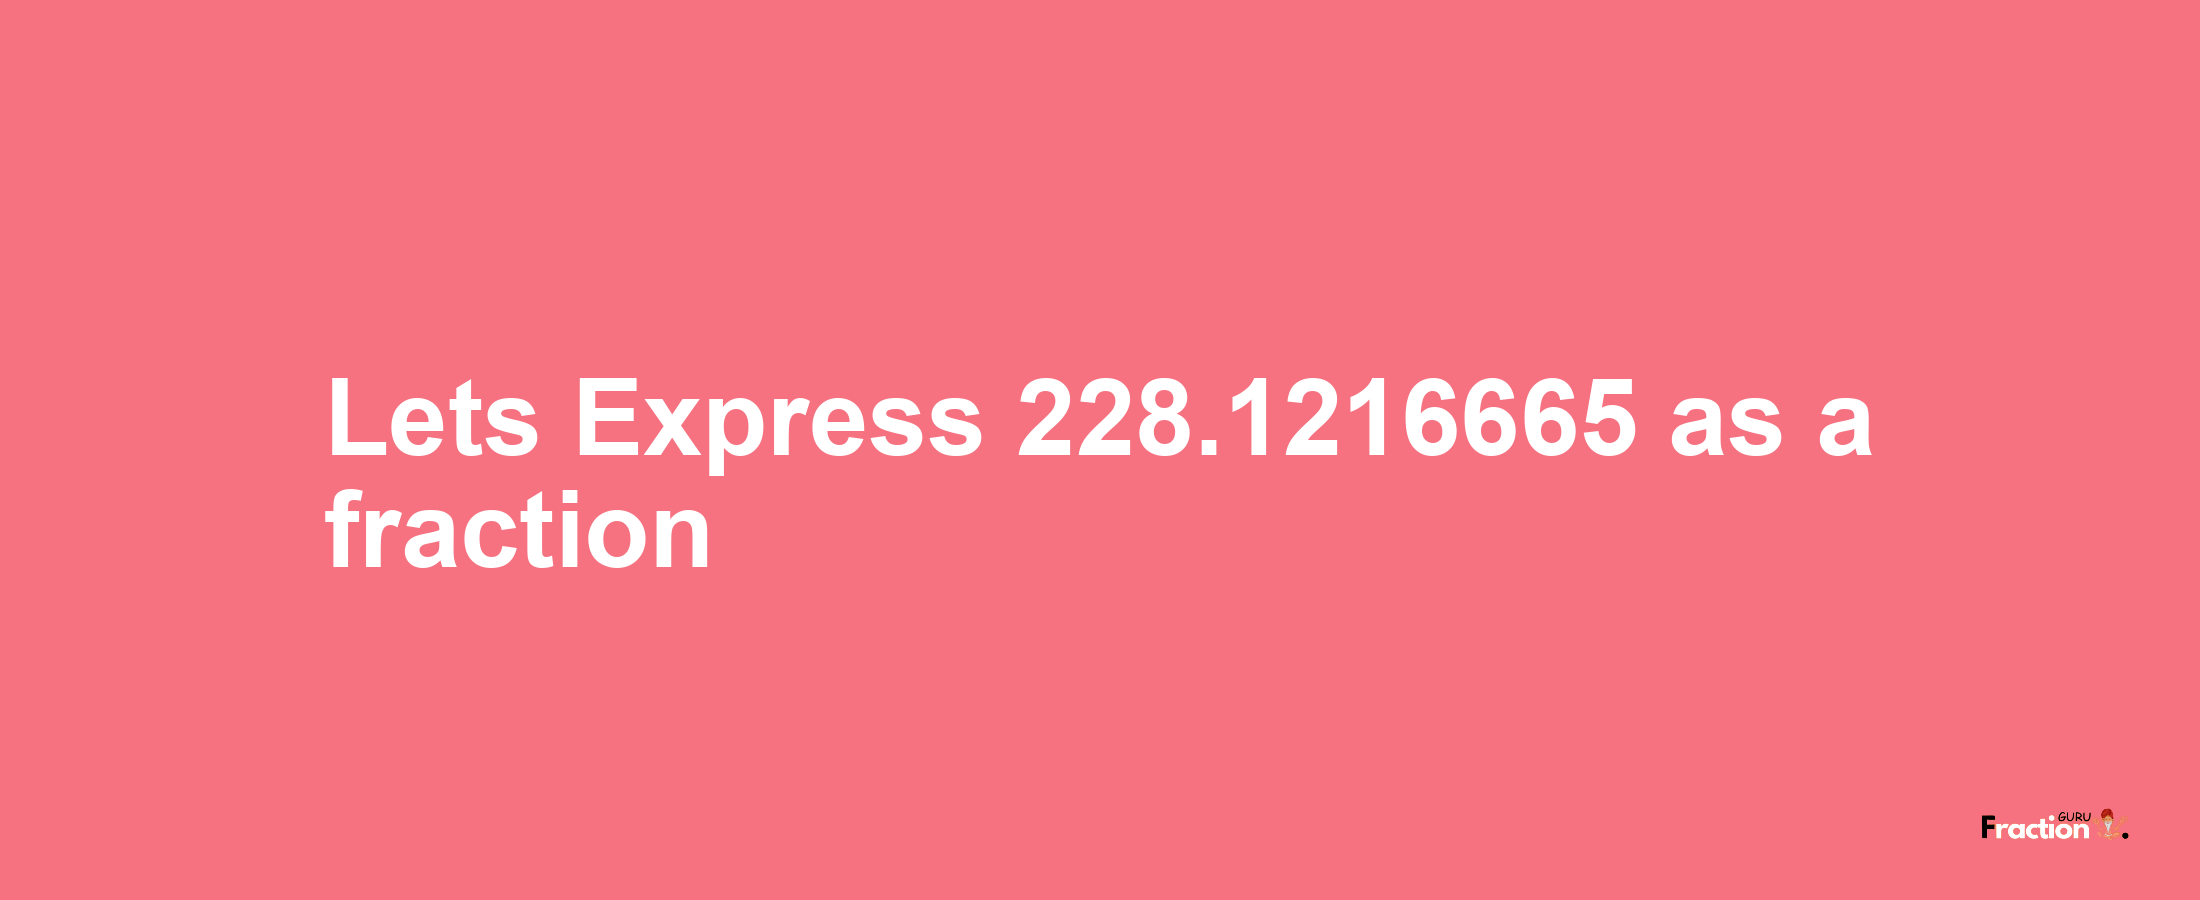 Lets Express 228.1216665 as afraction